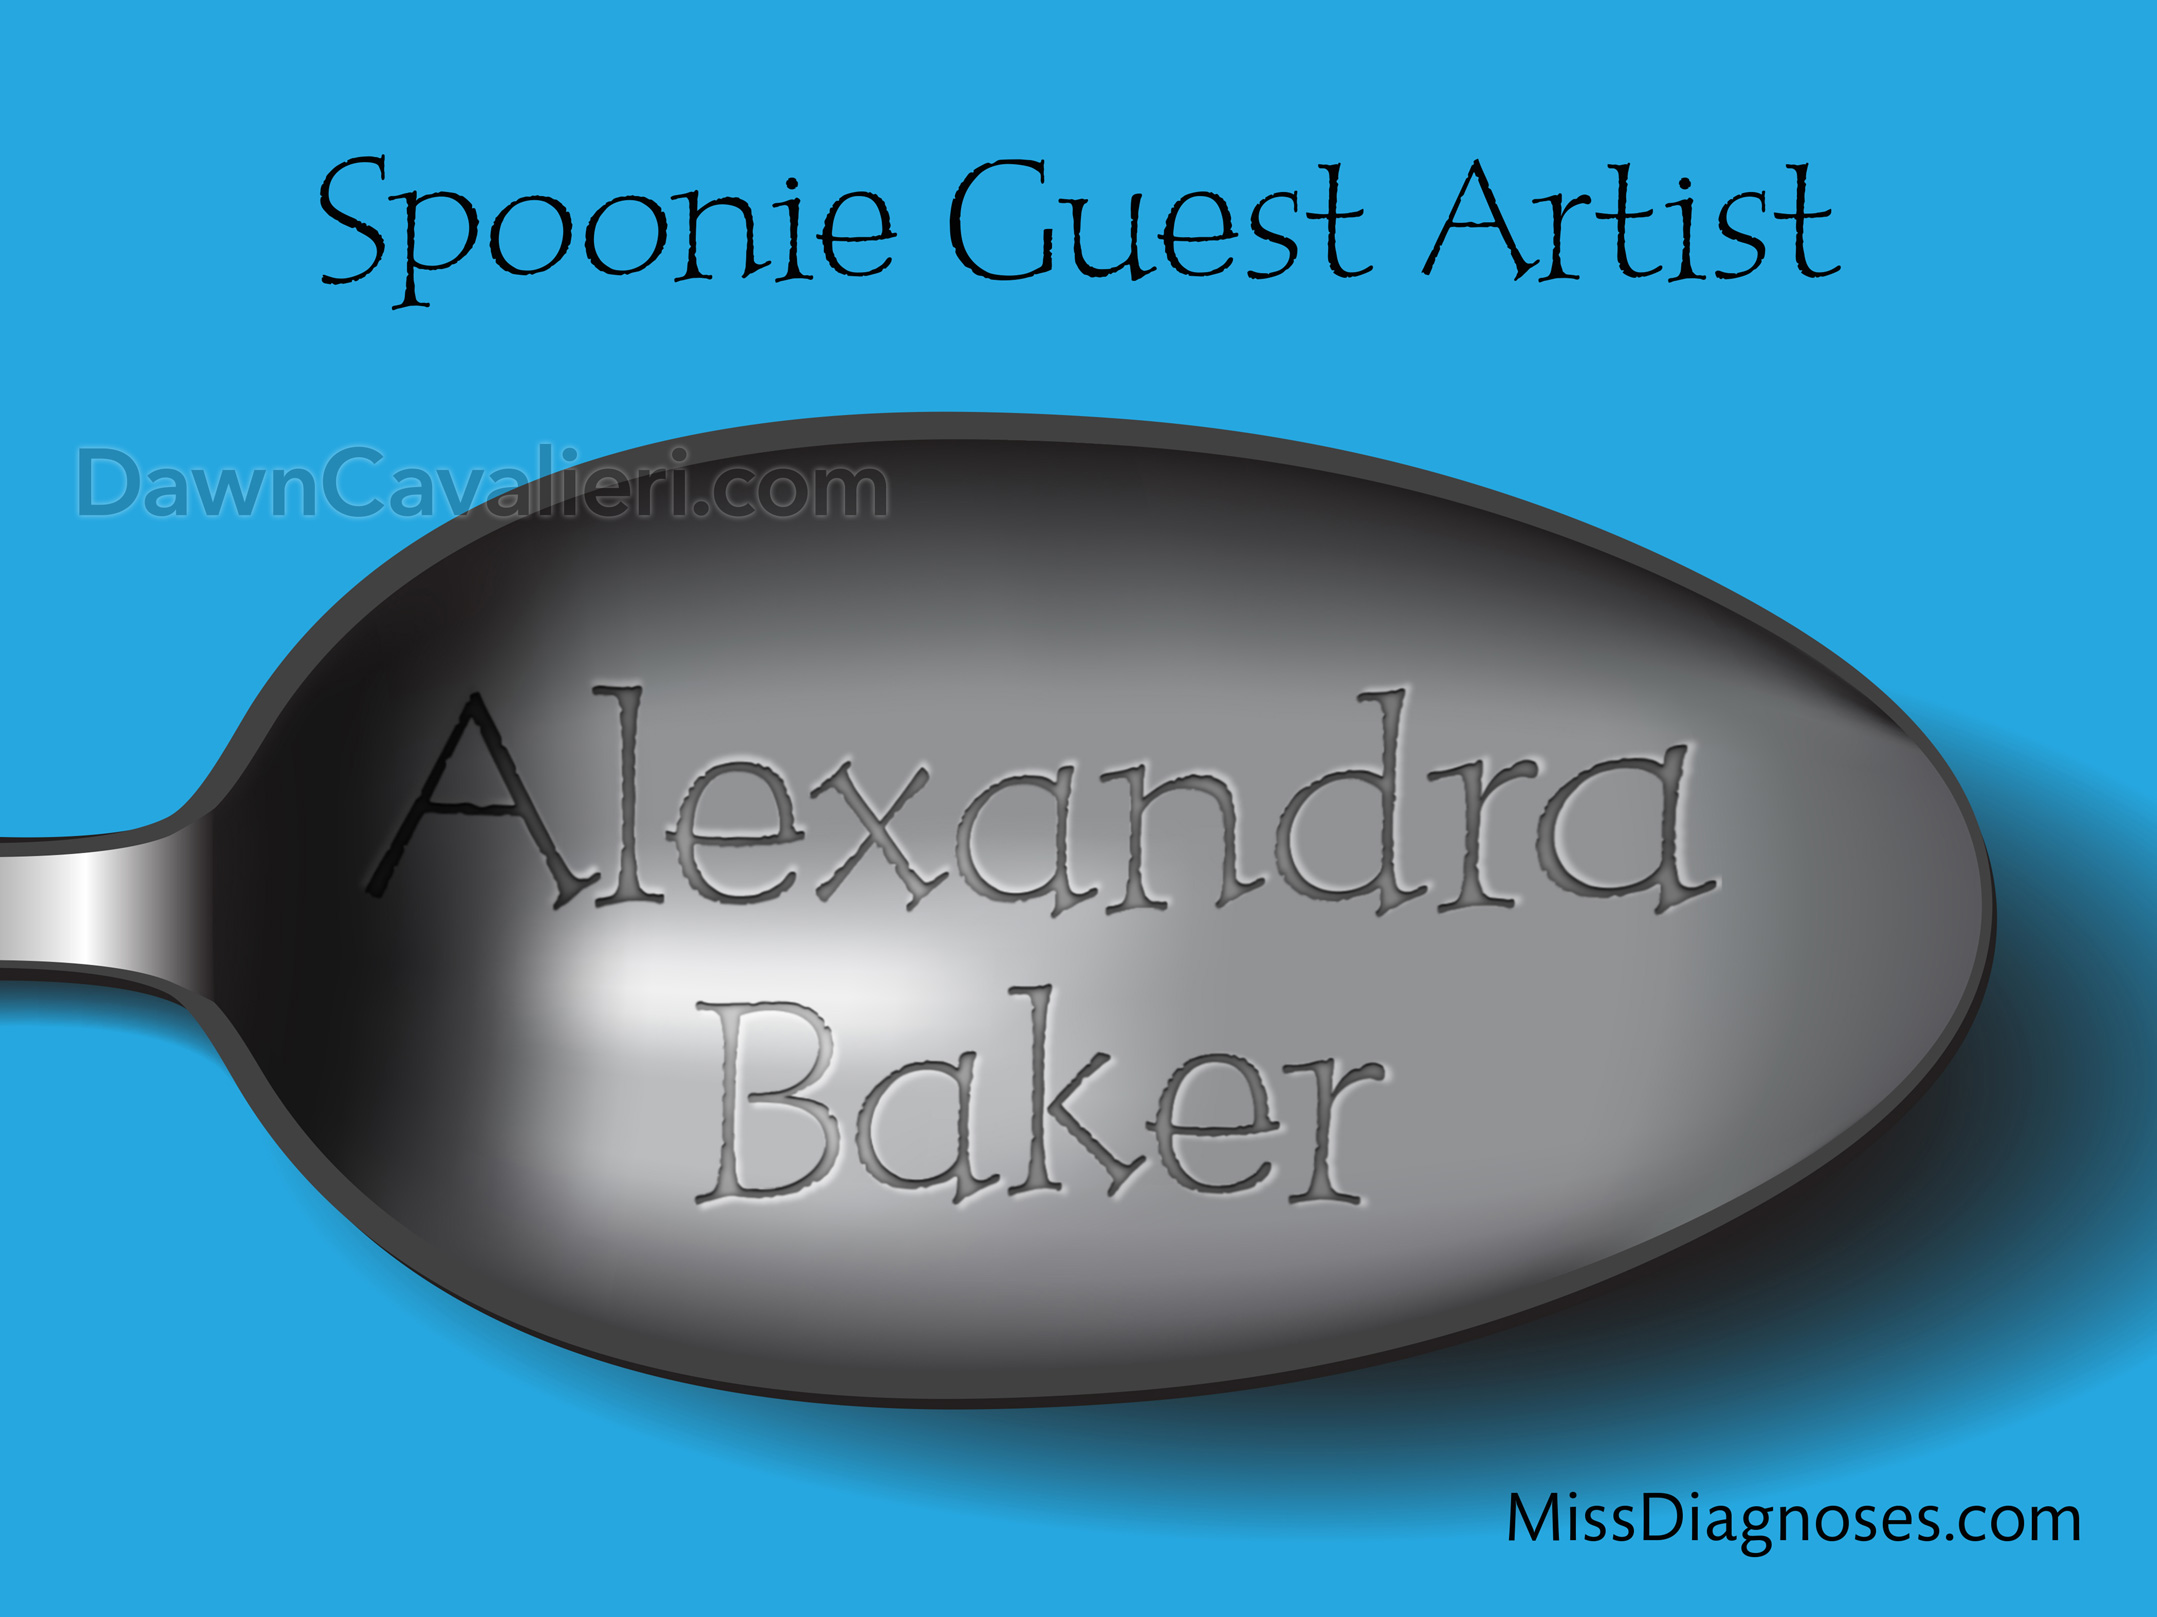 Header image for blog post. The top reads 'Spoonie Guest Artist.' The illustration is of the bowl part of a spoon in silver tones. Running across the bowl, styled to look like engraved type, is the name Alexandra Baker. In the lower right corner of the image is the name of the blog: Miss Diagnoses dot com. The background is blue. The ratio of the image is roughly 1.3 to 1.